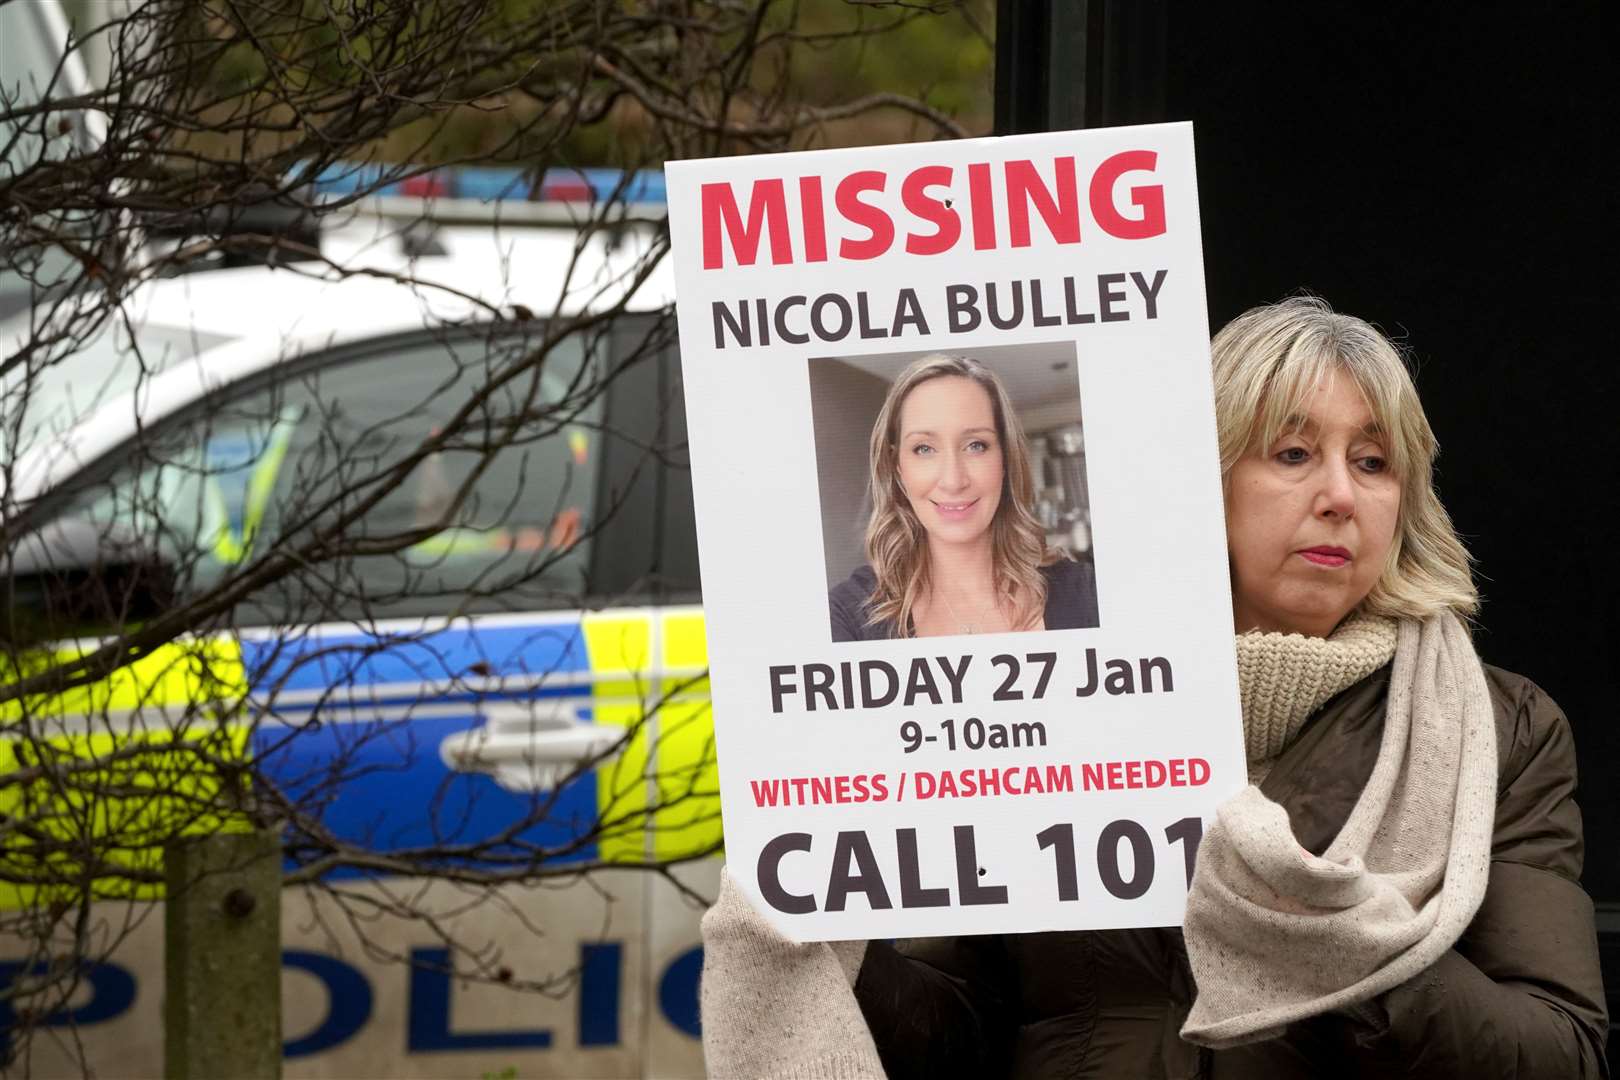 Friends of Nicola Bulley hold missing person appeal posters (Owen Humphreys/PA)